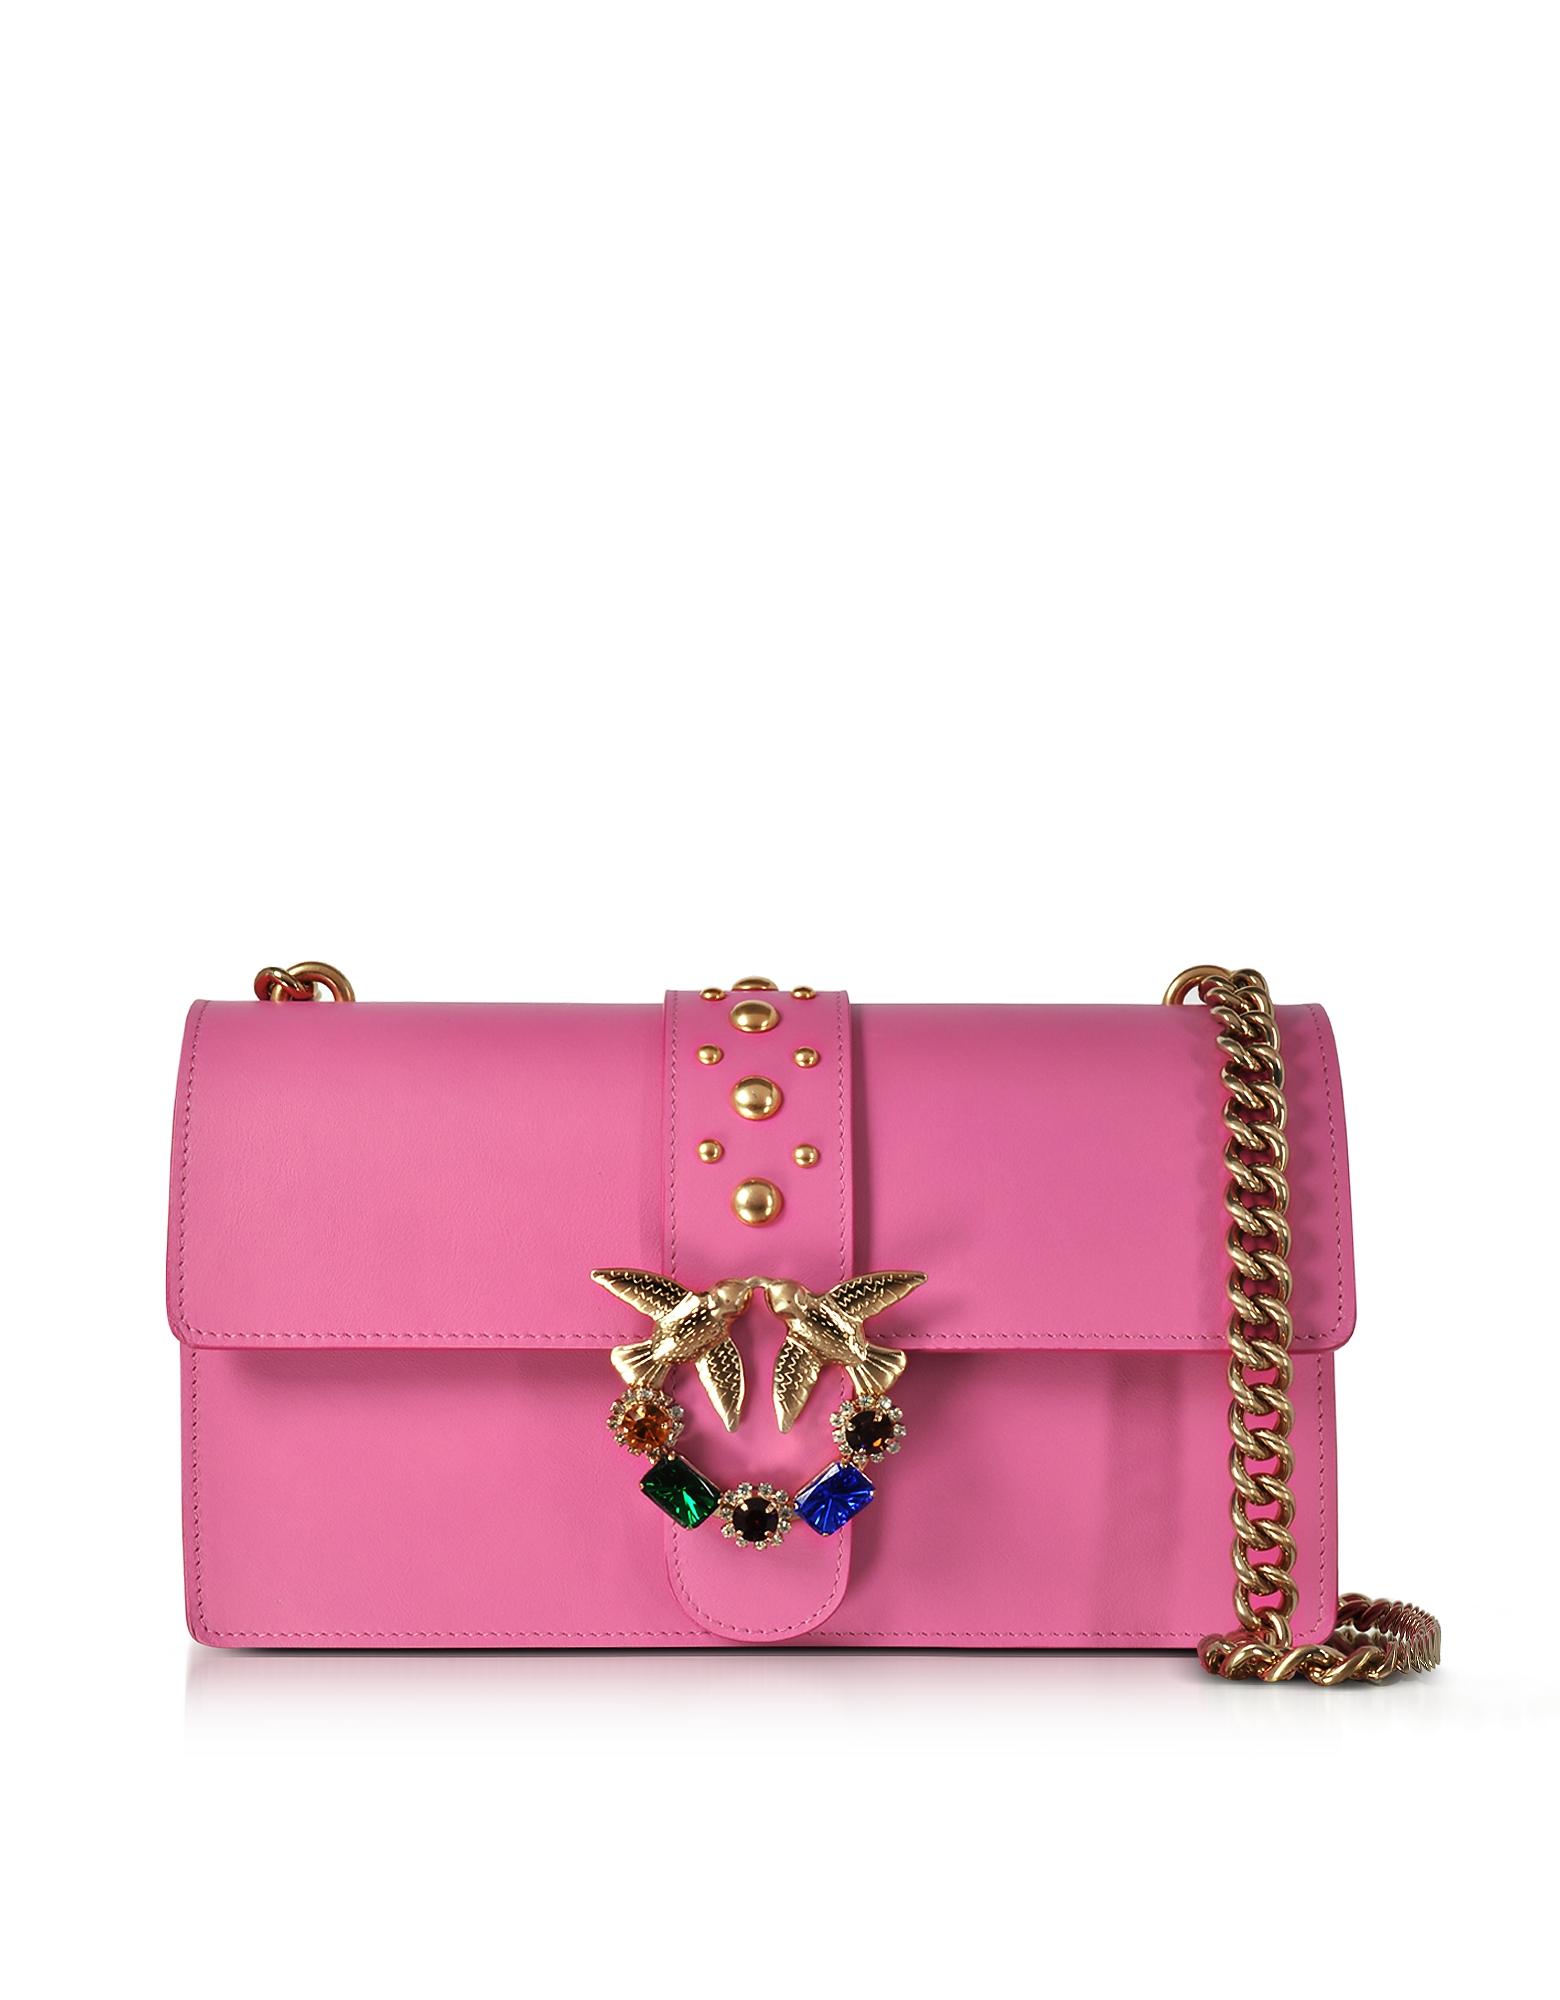 Pinko Love Pink Jeweled Leather Shoulder Bag - Lyst